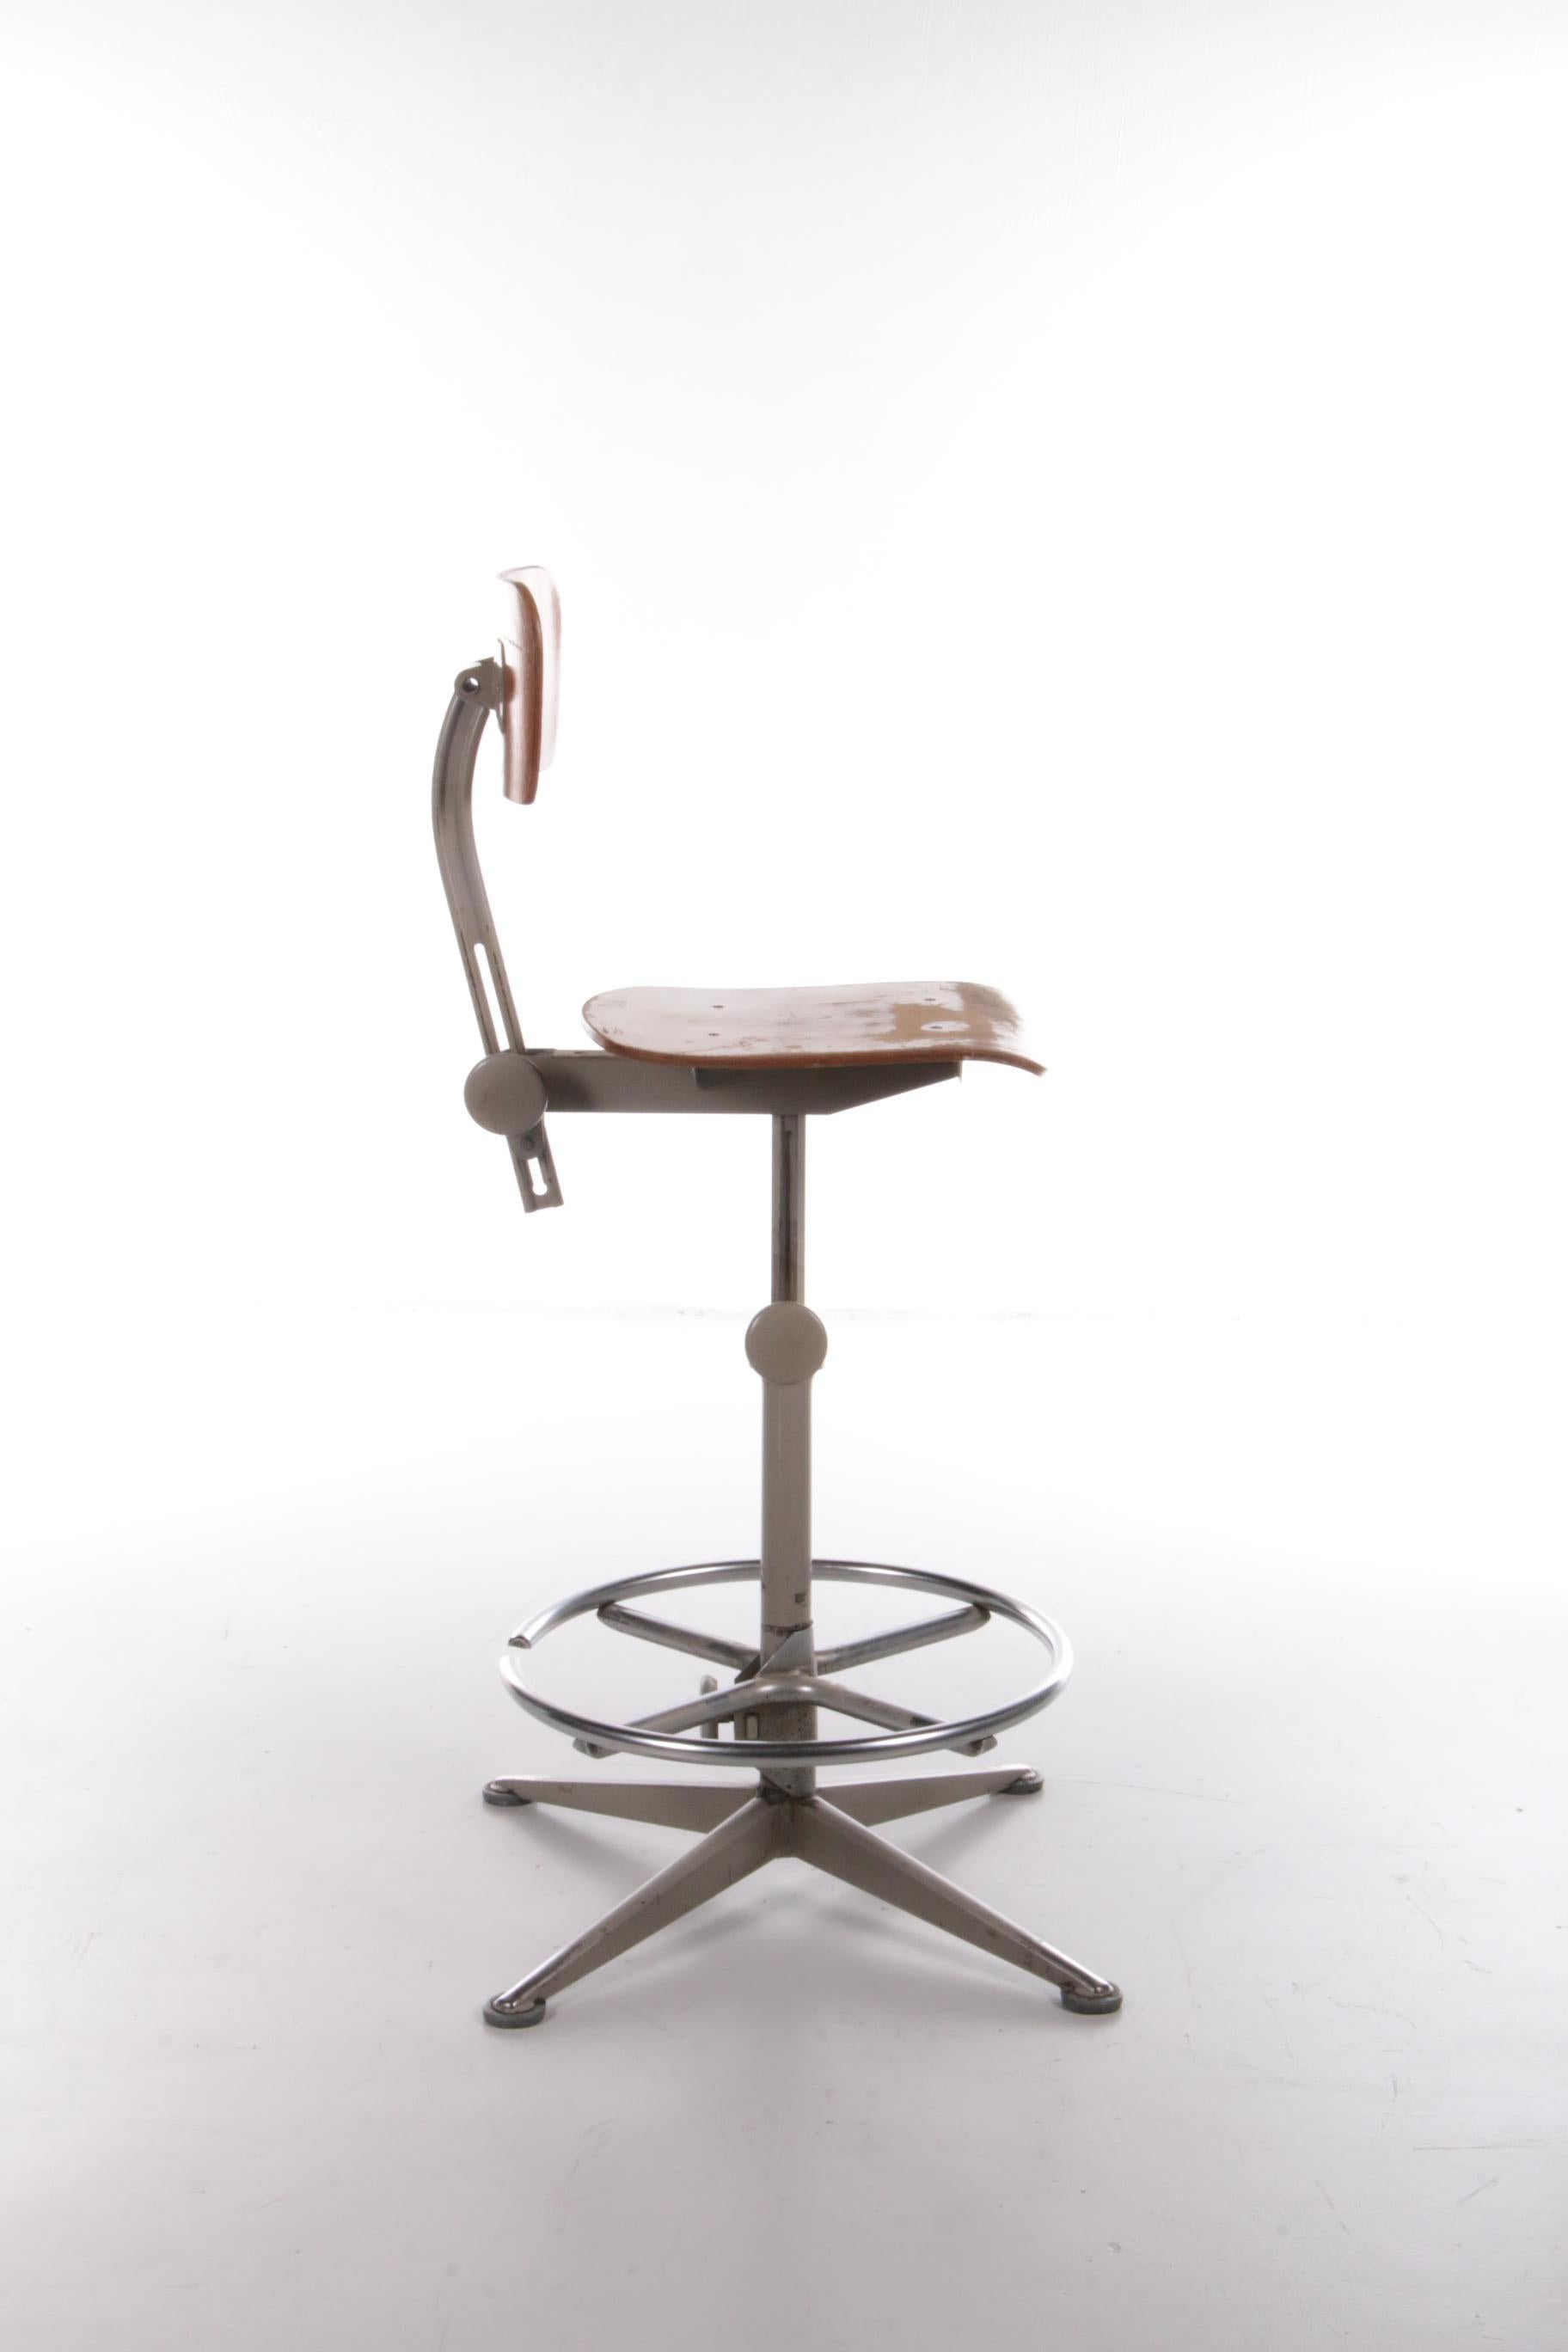 Mid-20th Century Industrial Drawing Table Chair by Friso Kramer for Ahrend, ca 1960